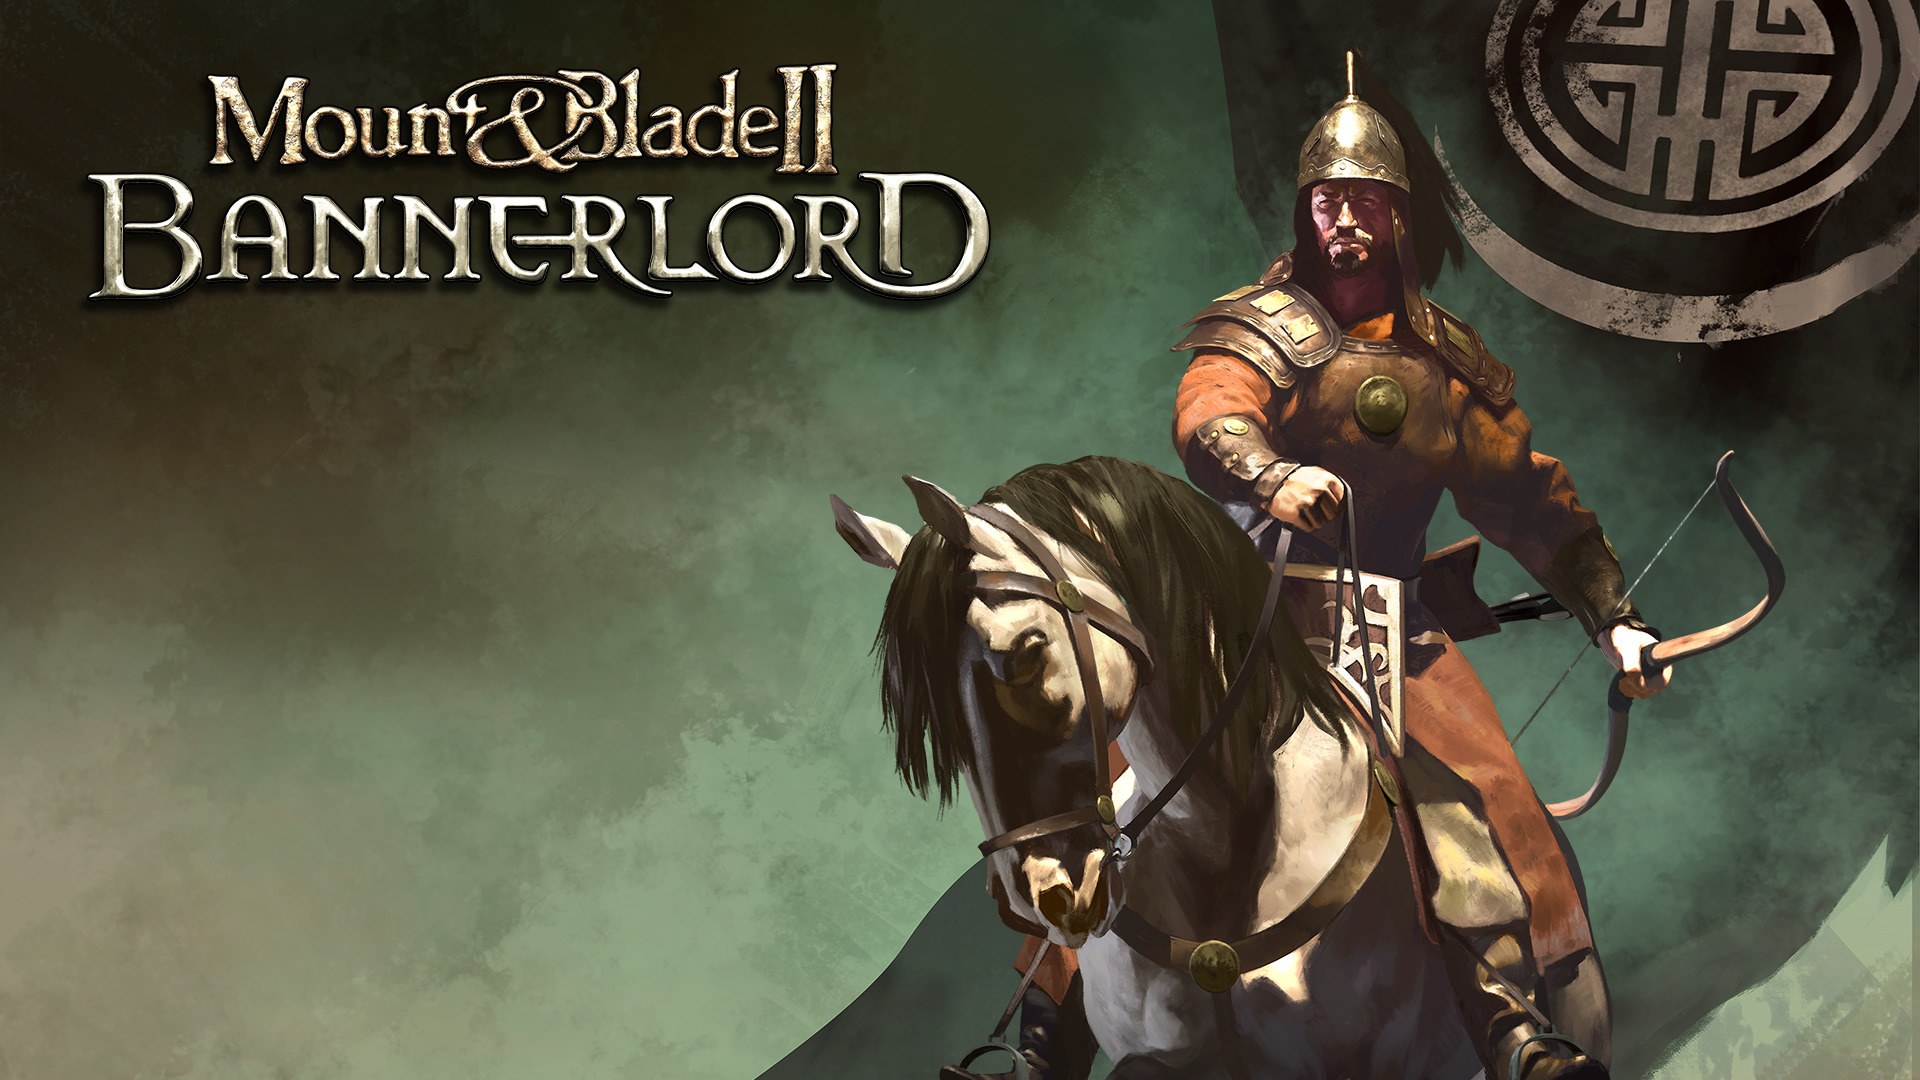 Video Game Mount & Blade II: Bannerlord Wallpaper